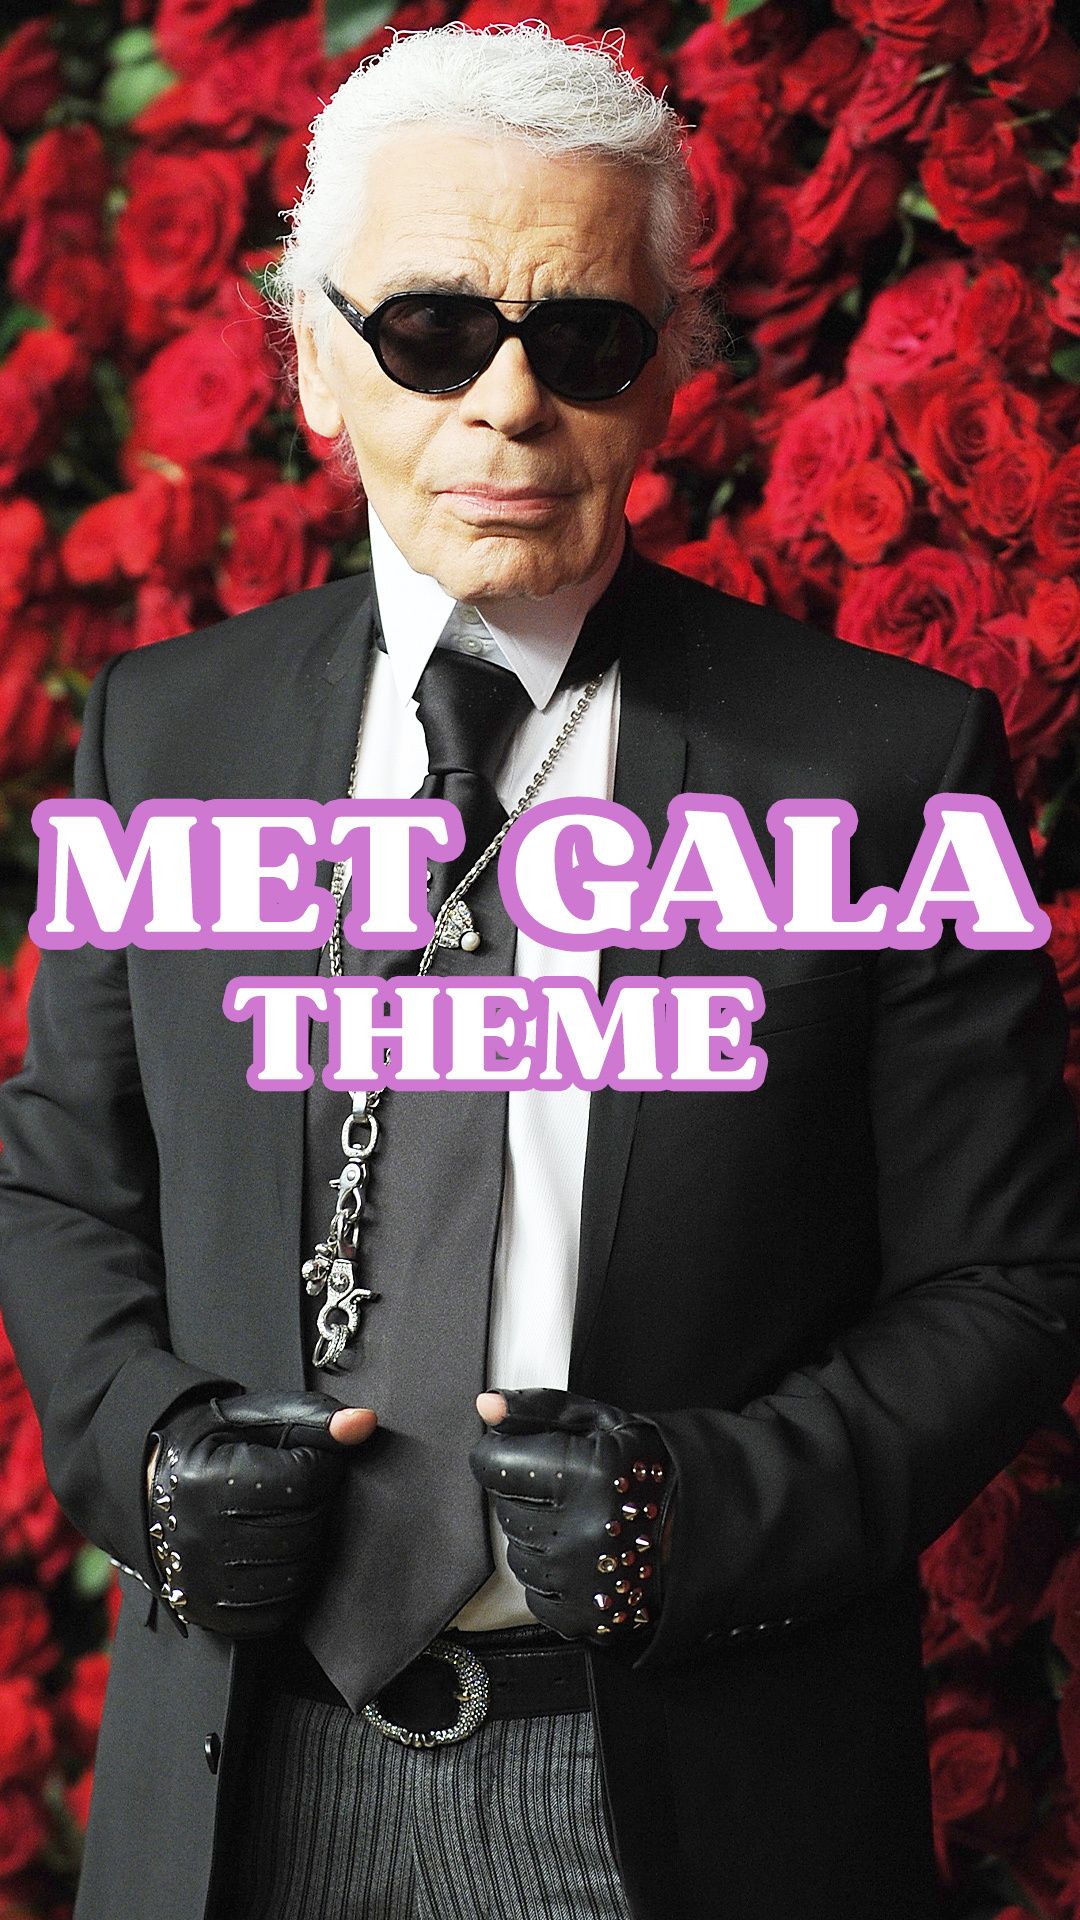 Karl Lagerfeld: The Man, The Legacy, and The MET Gala Theme